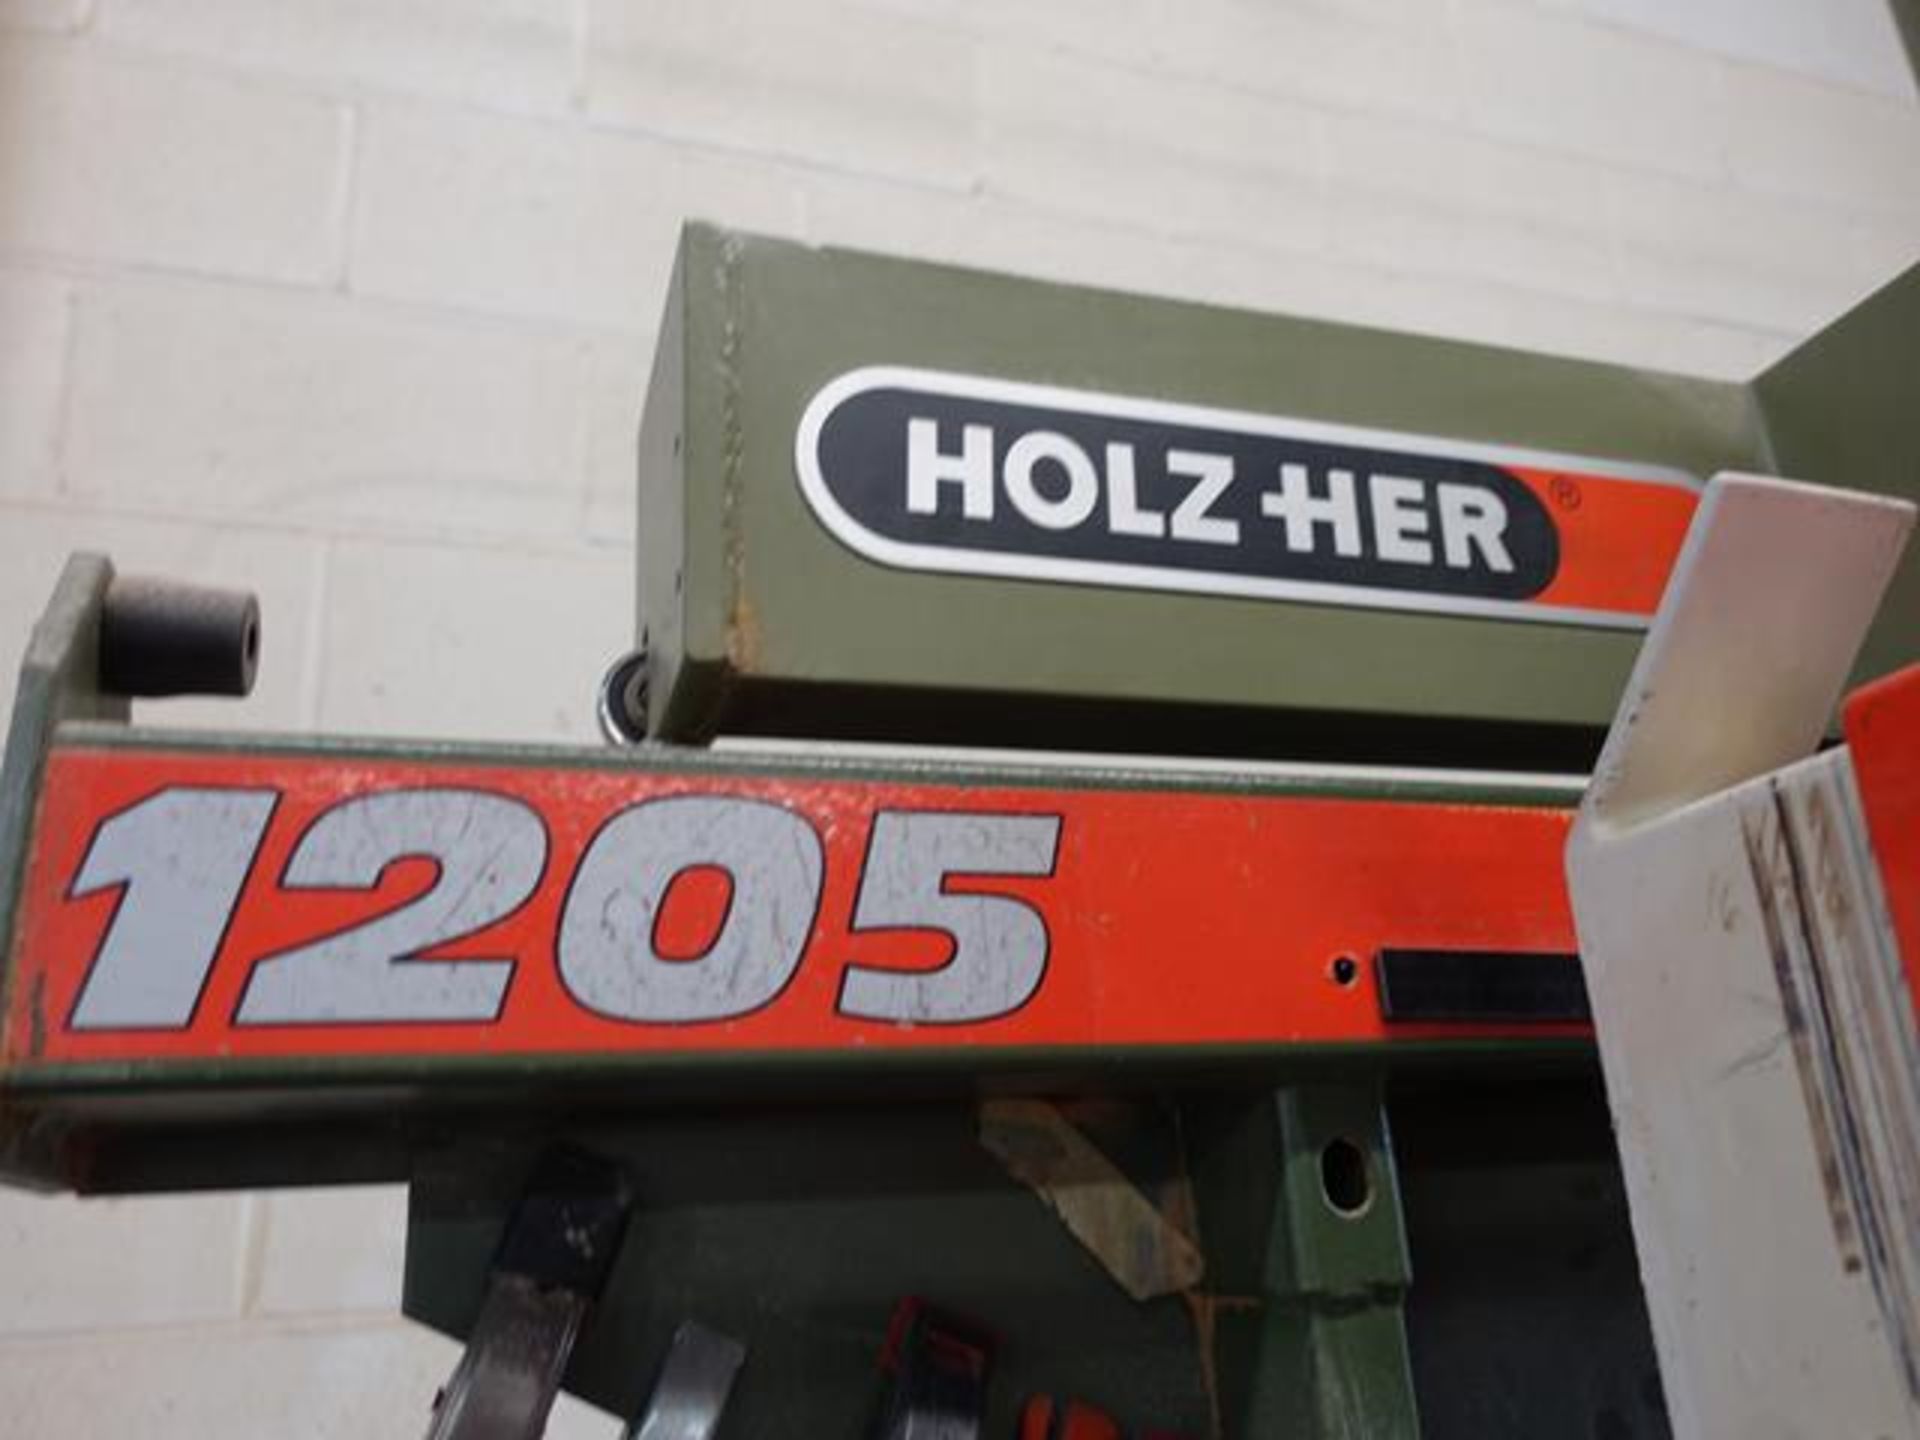 HOLZ-HER, 1205, PANEL SAW, S/N 3549 (RIGGING $400) - Image 4 of 5